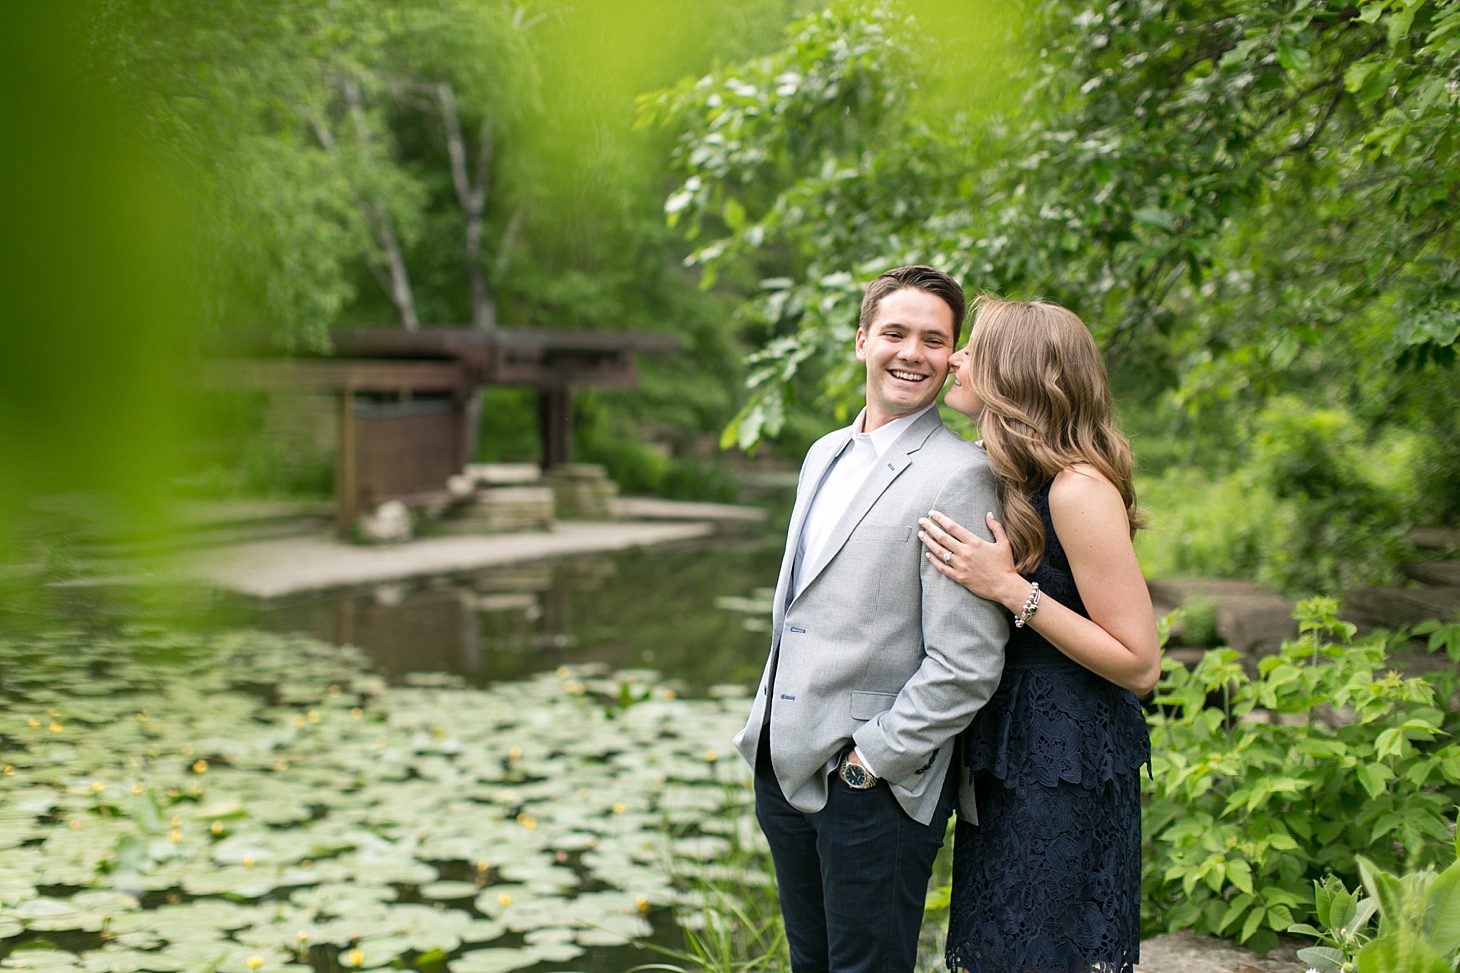 Lily Pool Engagement Photos Chicago_0002